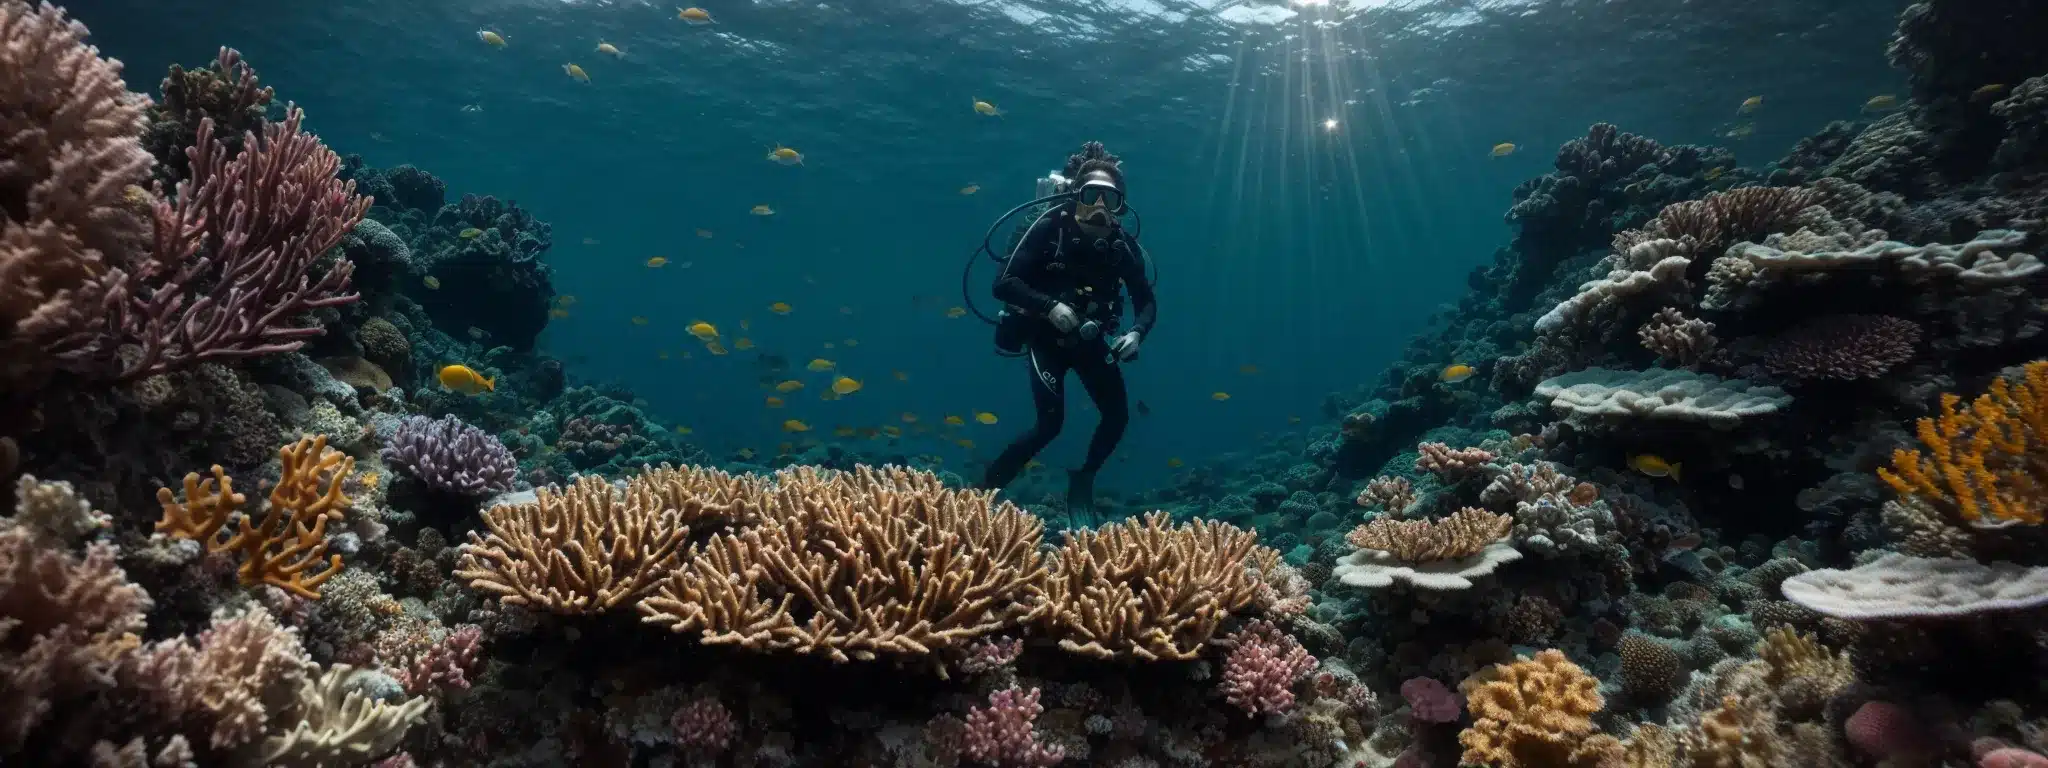 A Diver With A Flashlight Explores A Vibrant Coral Reef Teeming With Marine Life, Symbolizing The Search For Valuable Consumer Insights.